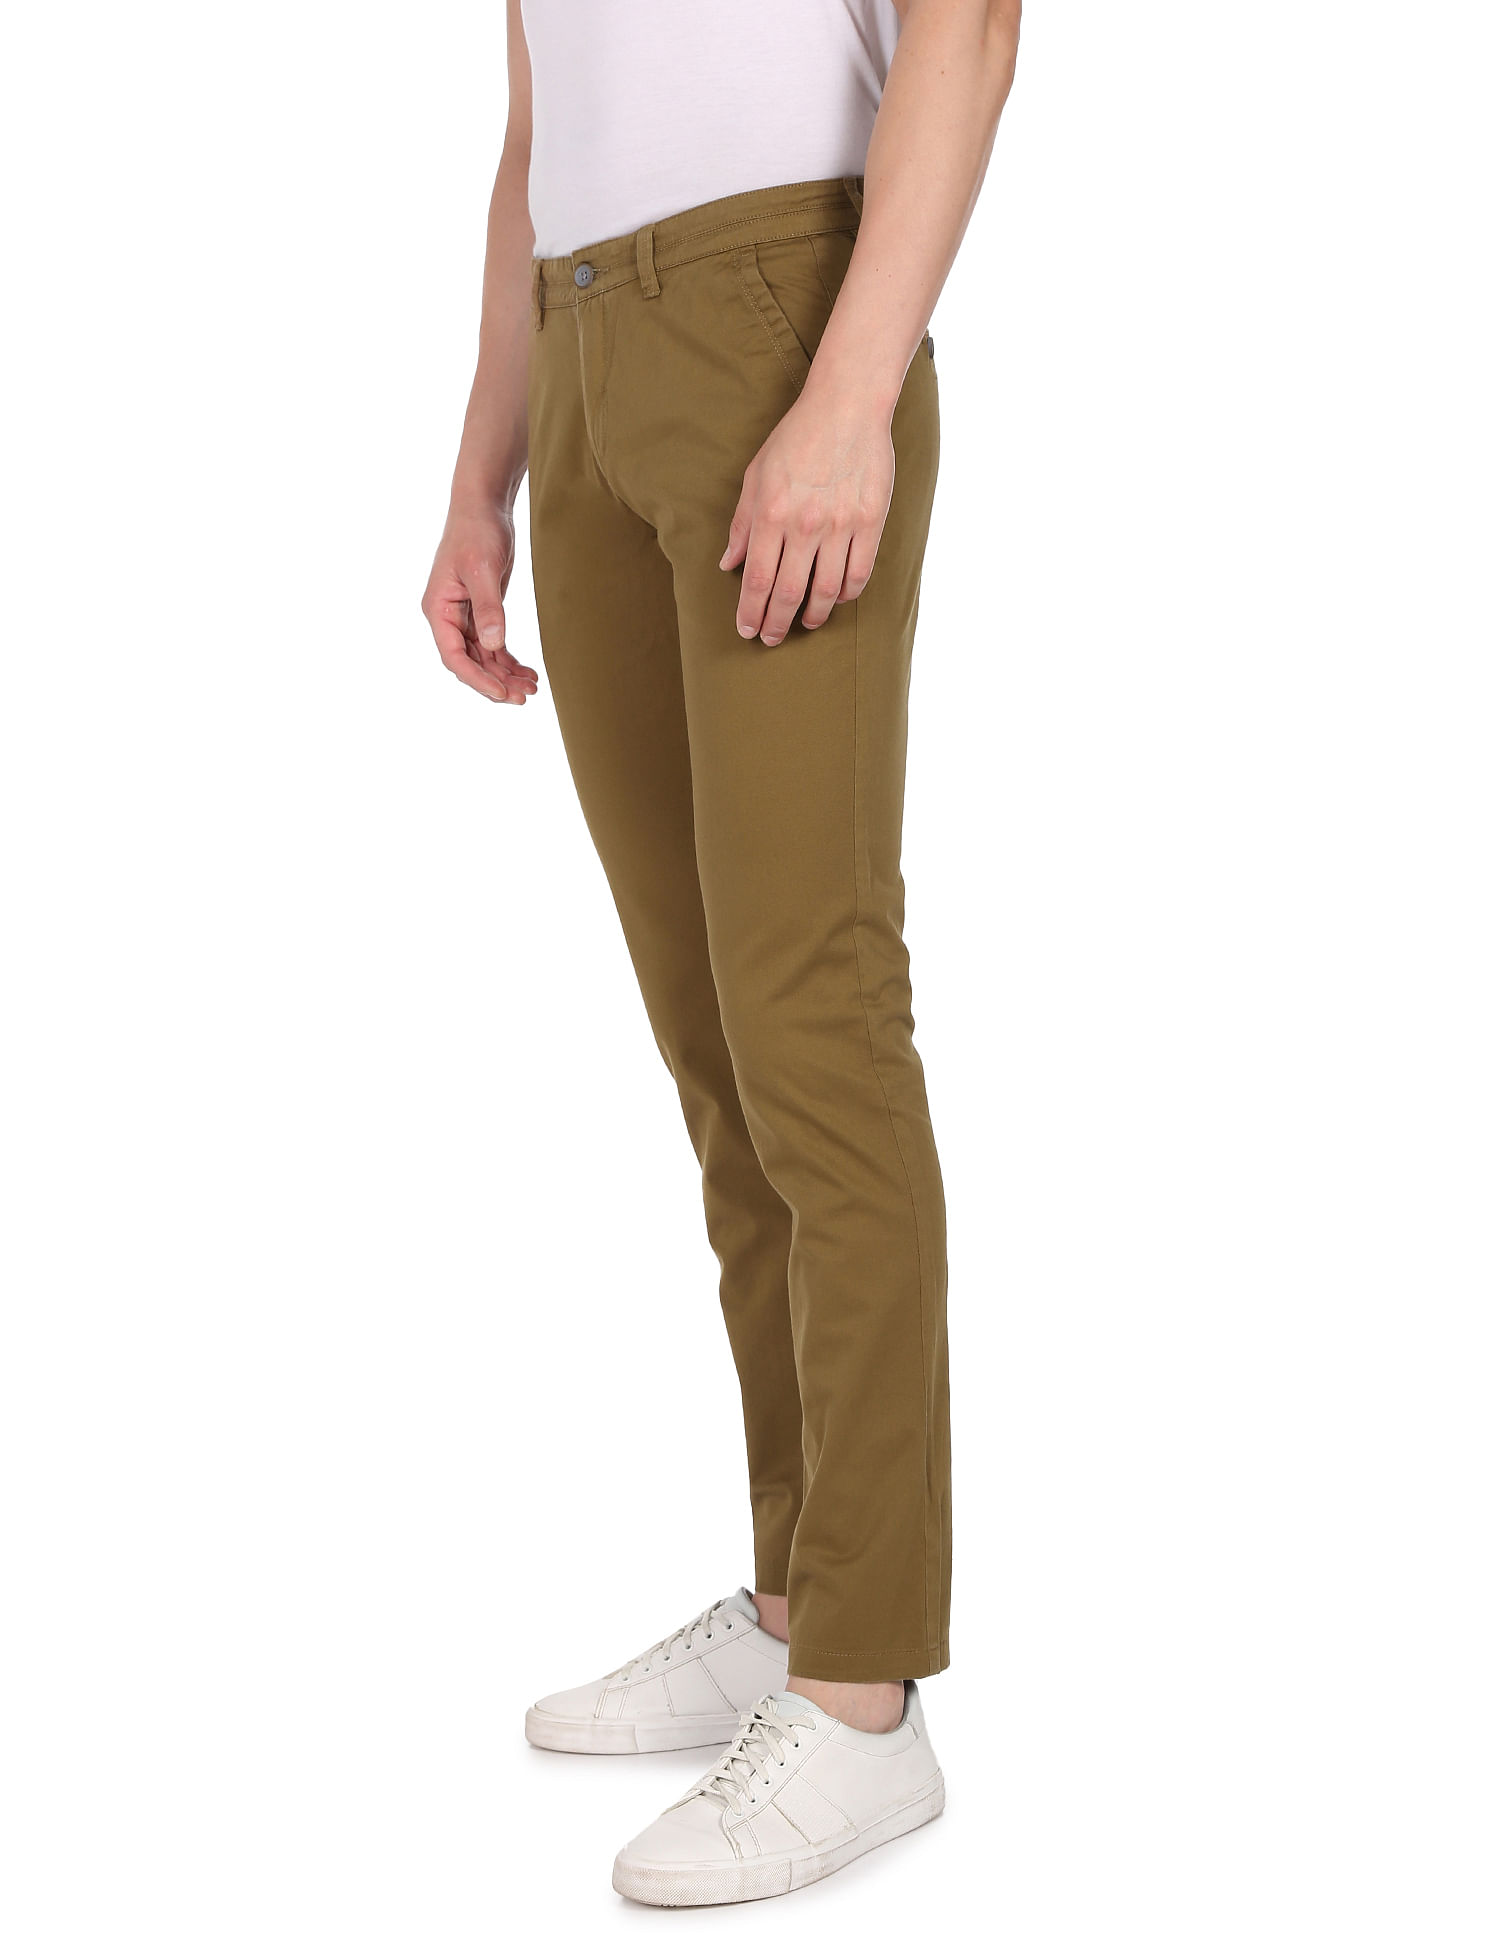 What are chino pants and how do I wear them? - Oliver Wicks